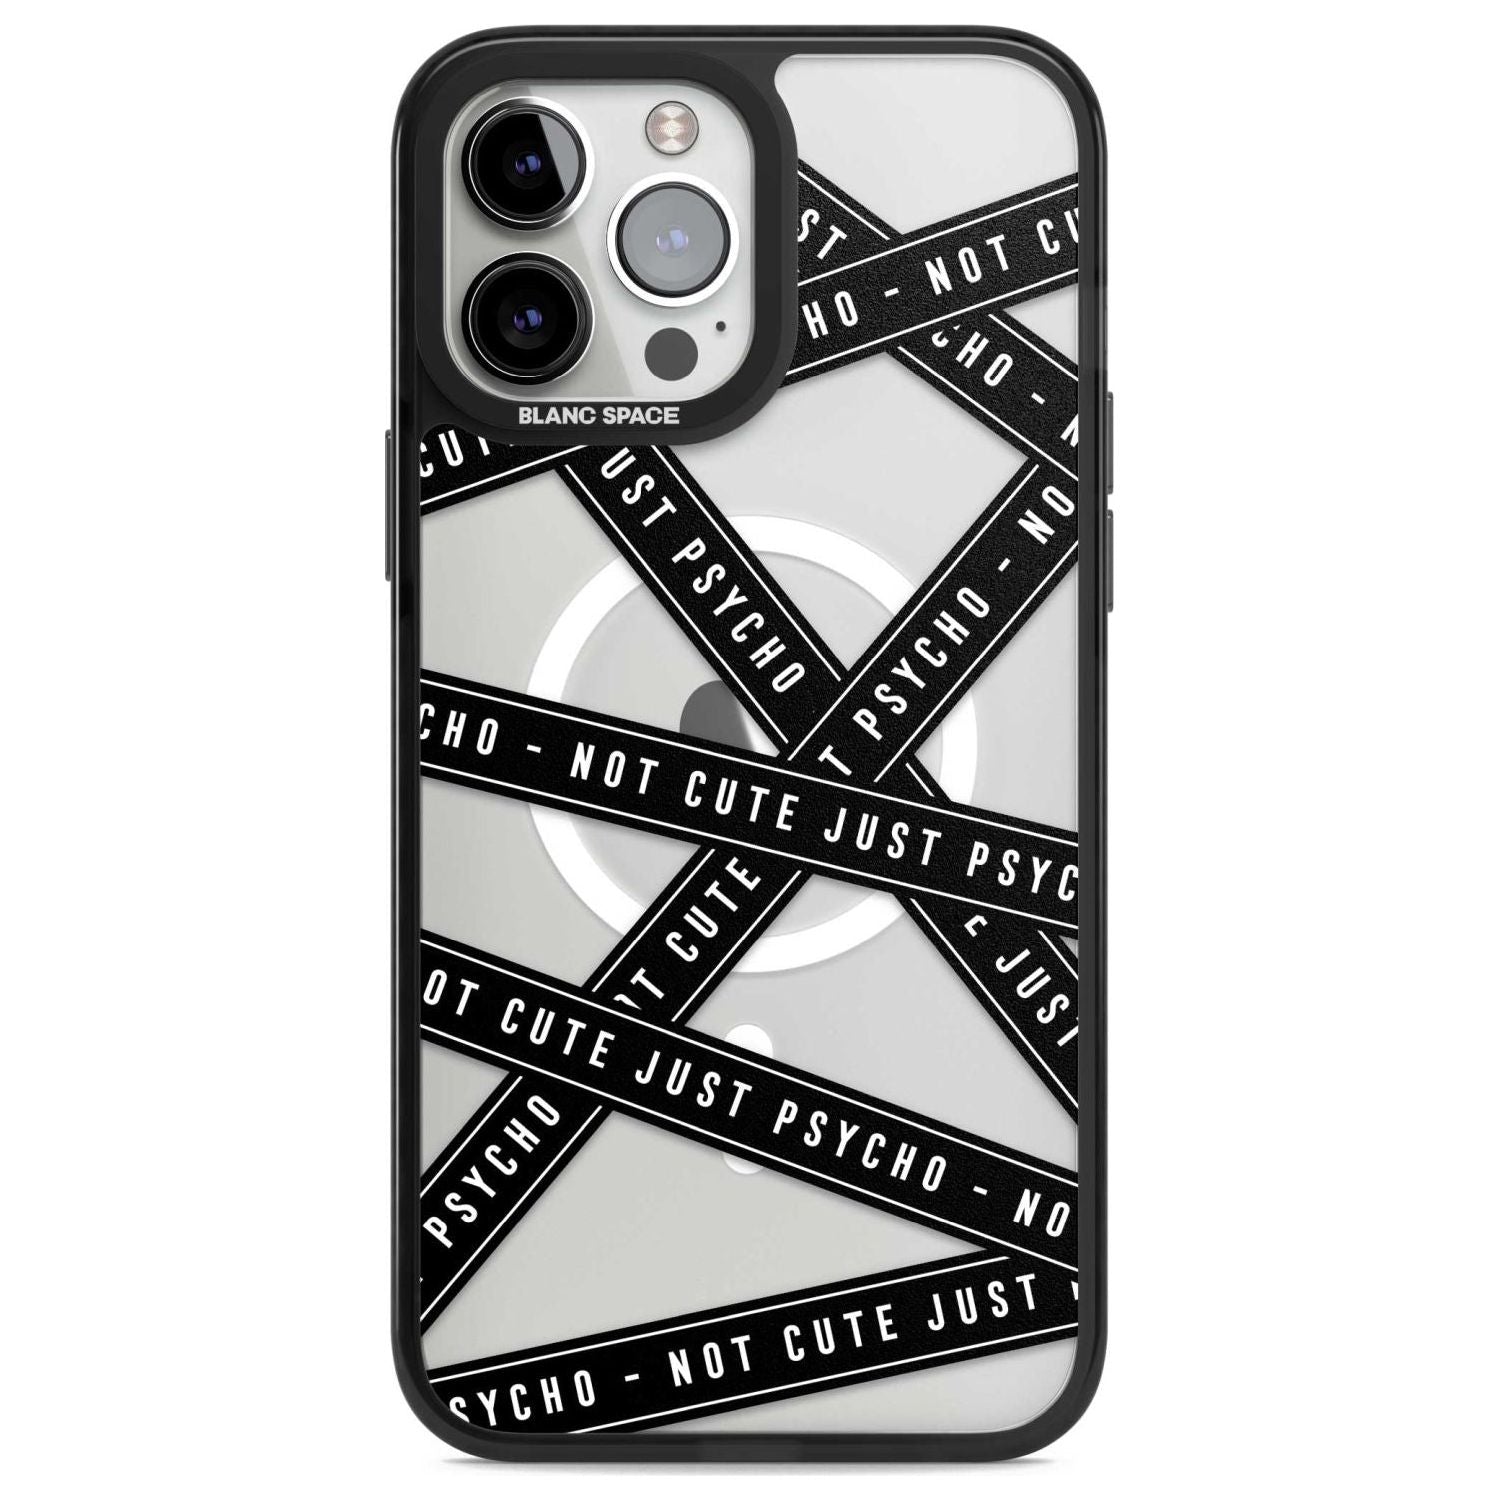 Caution Tape (Clear) Not Cute Just Psycho Phone Case iPhone 13 Pro Max / Magsafe Black Impact Case Blanc Space